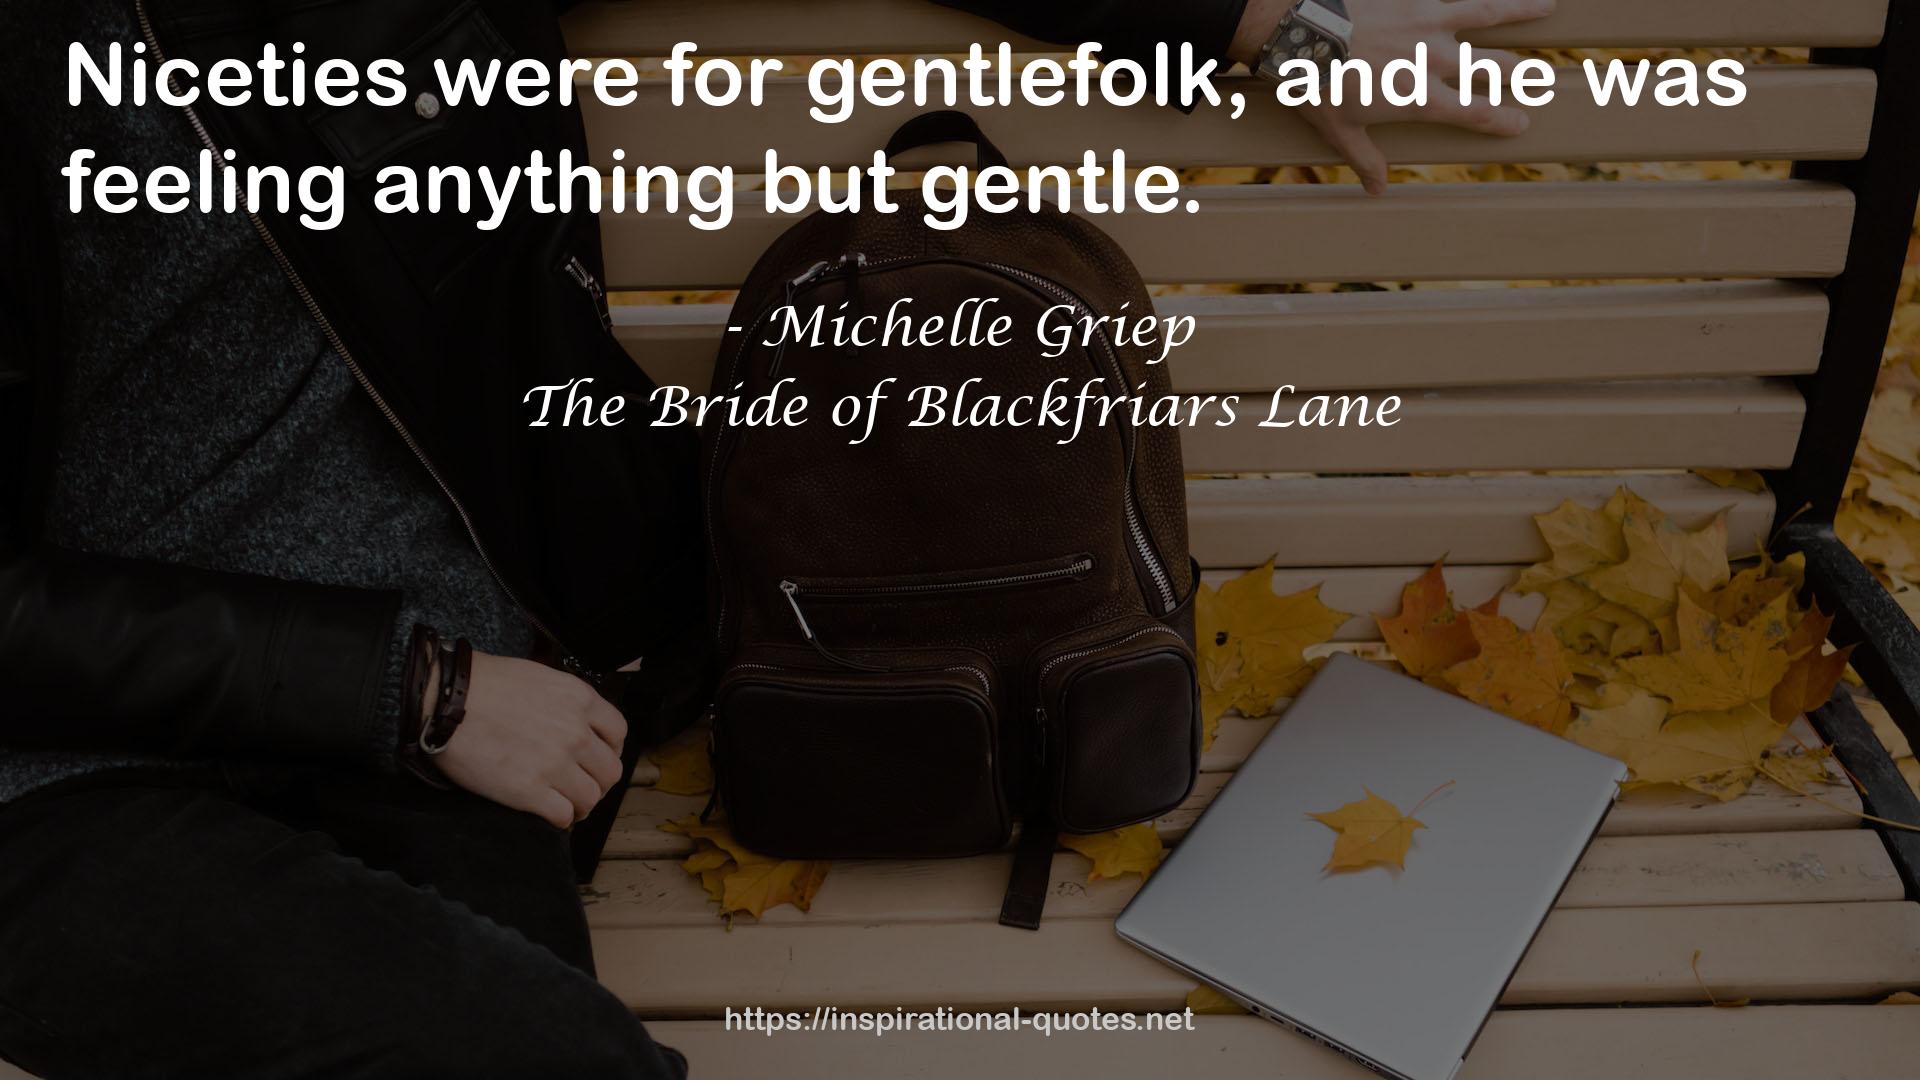 The Bride of Blackfriars Lane QUOTES